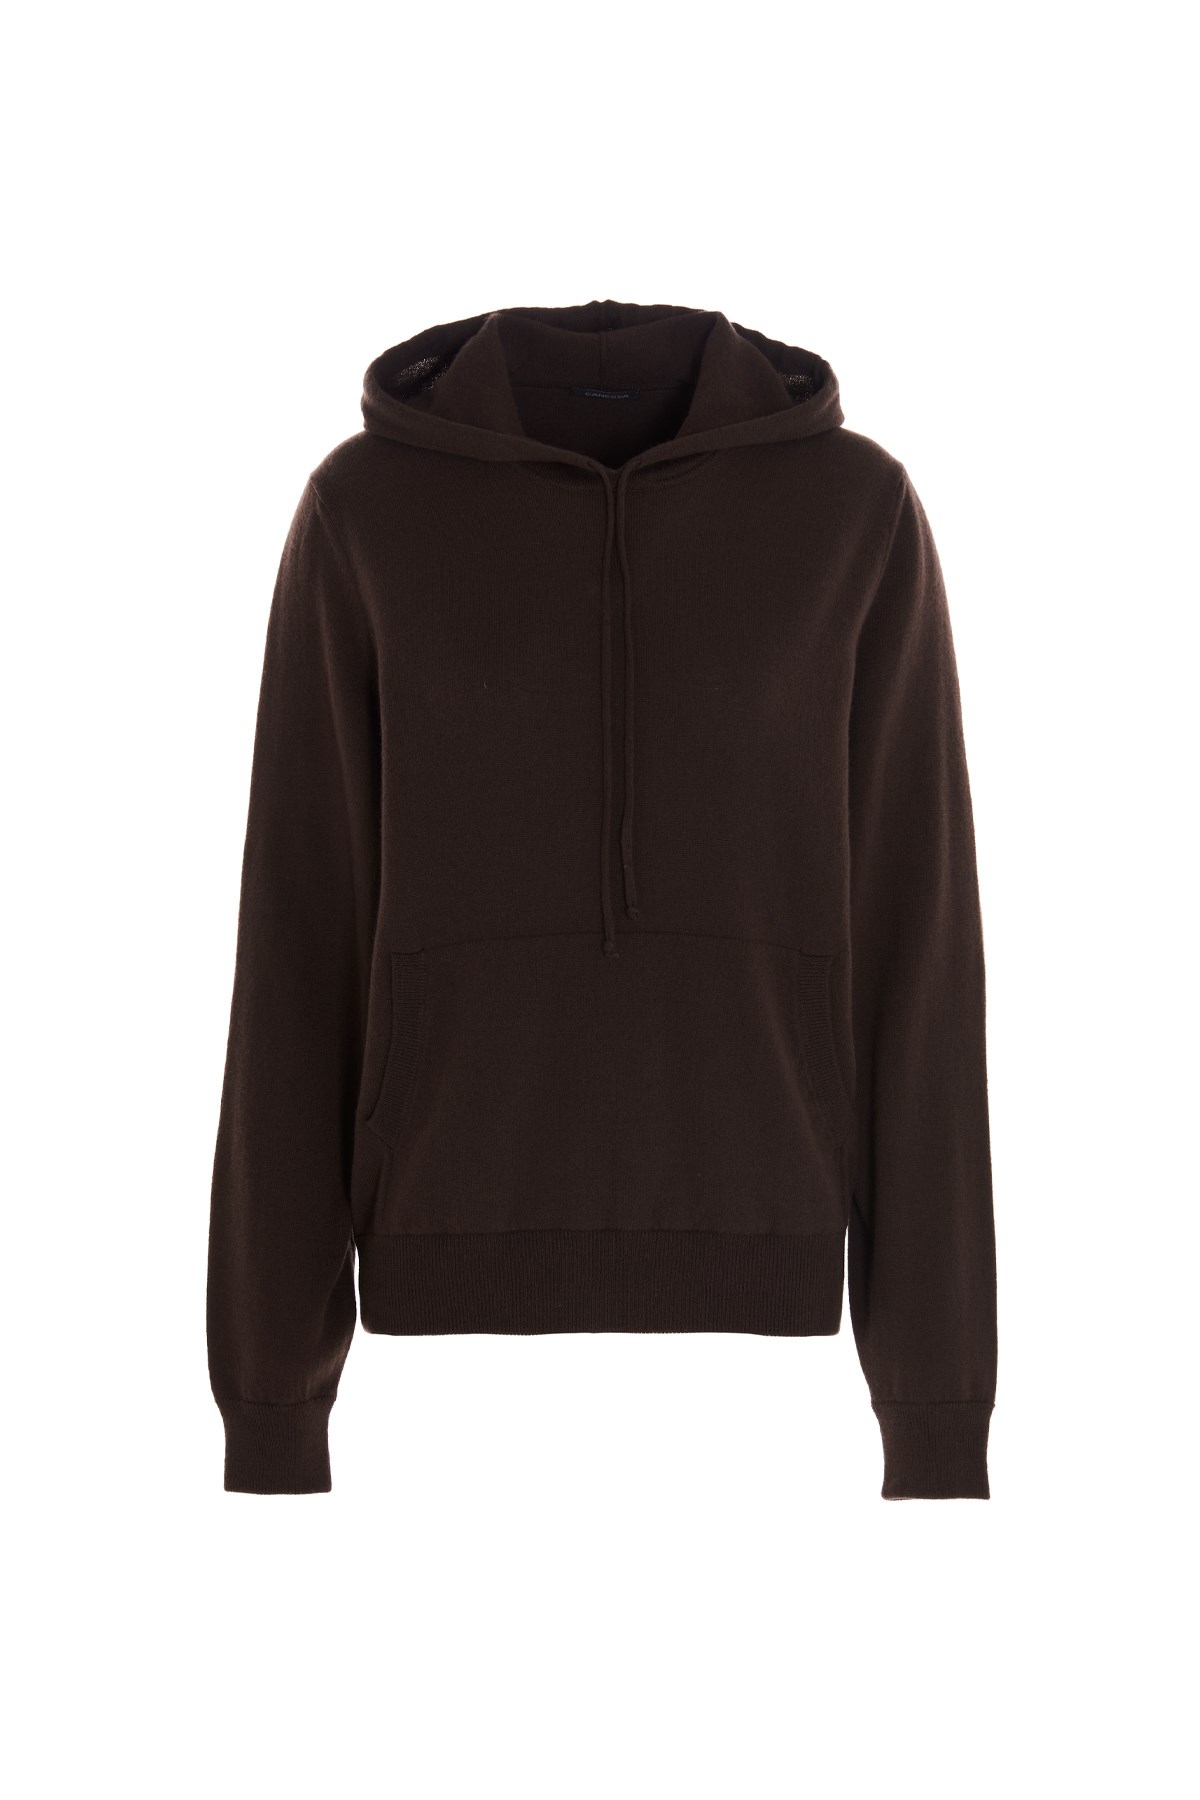 CANESSA Cashmere Hooded Sweater